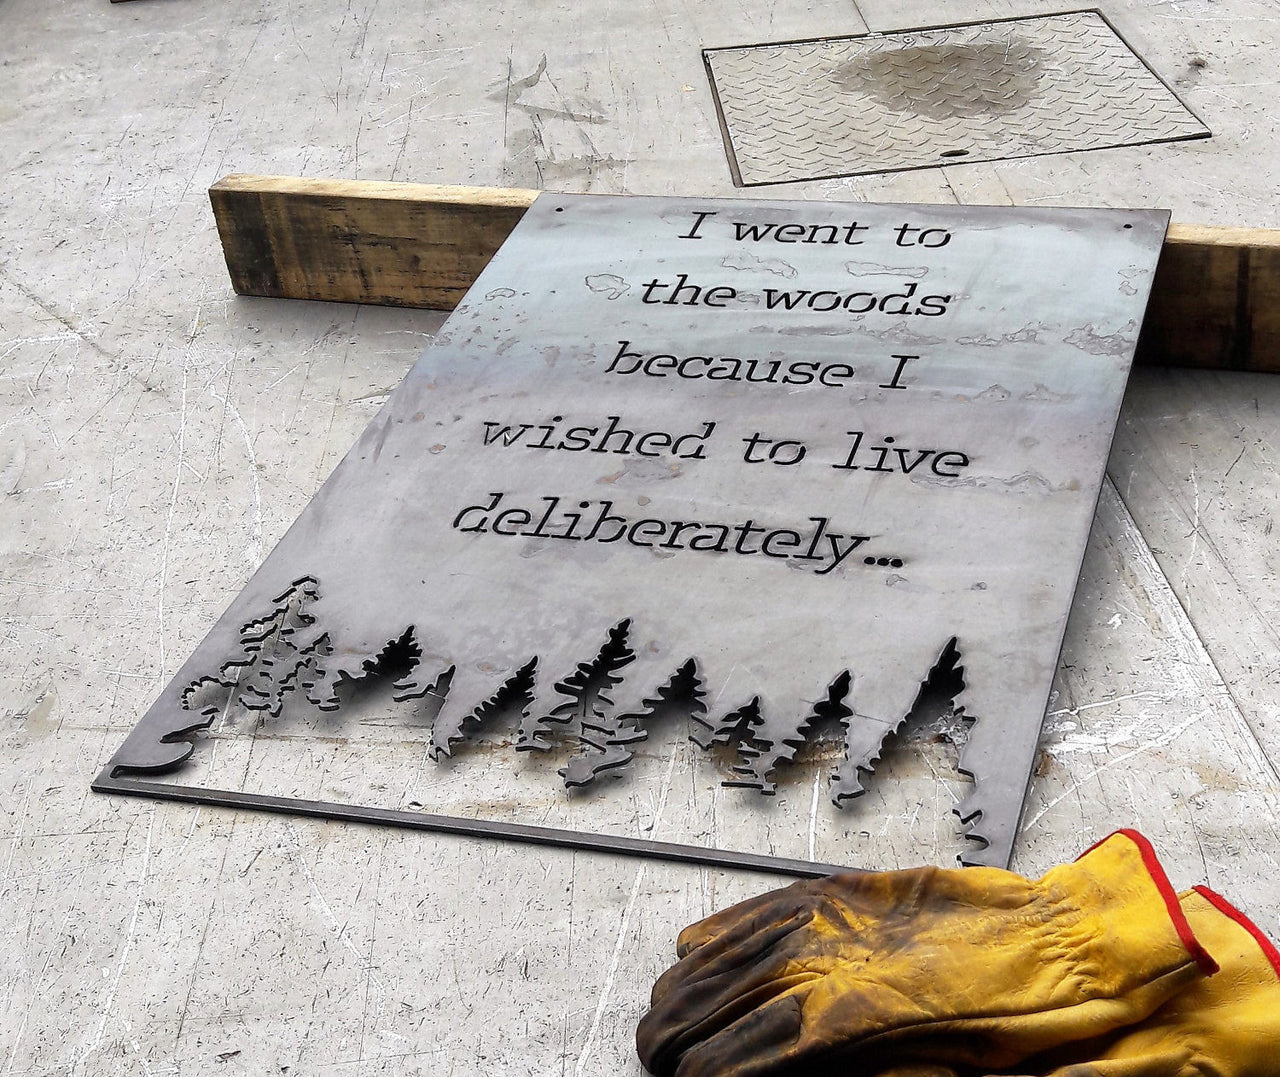 Rectangle metal sign, with a famous quote said by David Thoreau which reads, "I Went to the Woods because I Wished to Live Deliberately..."